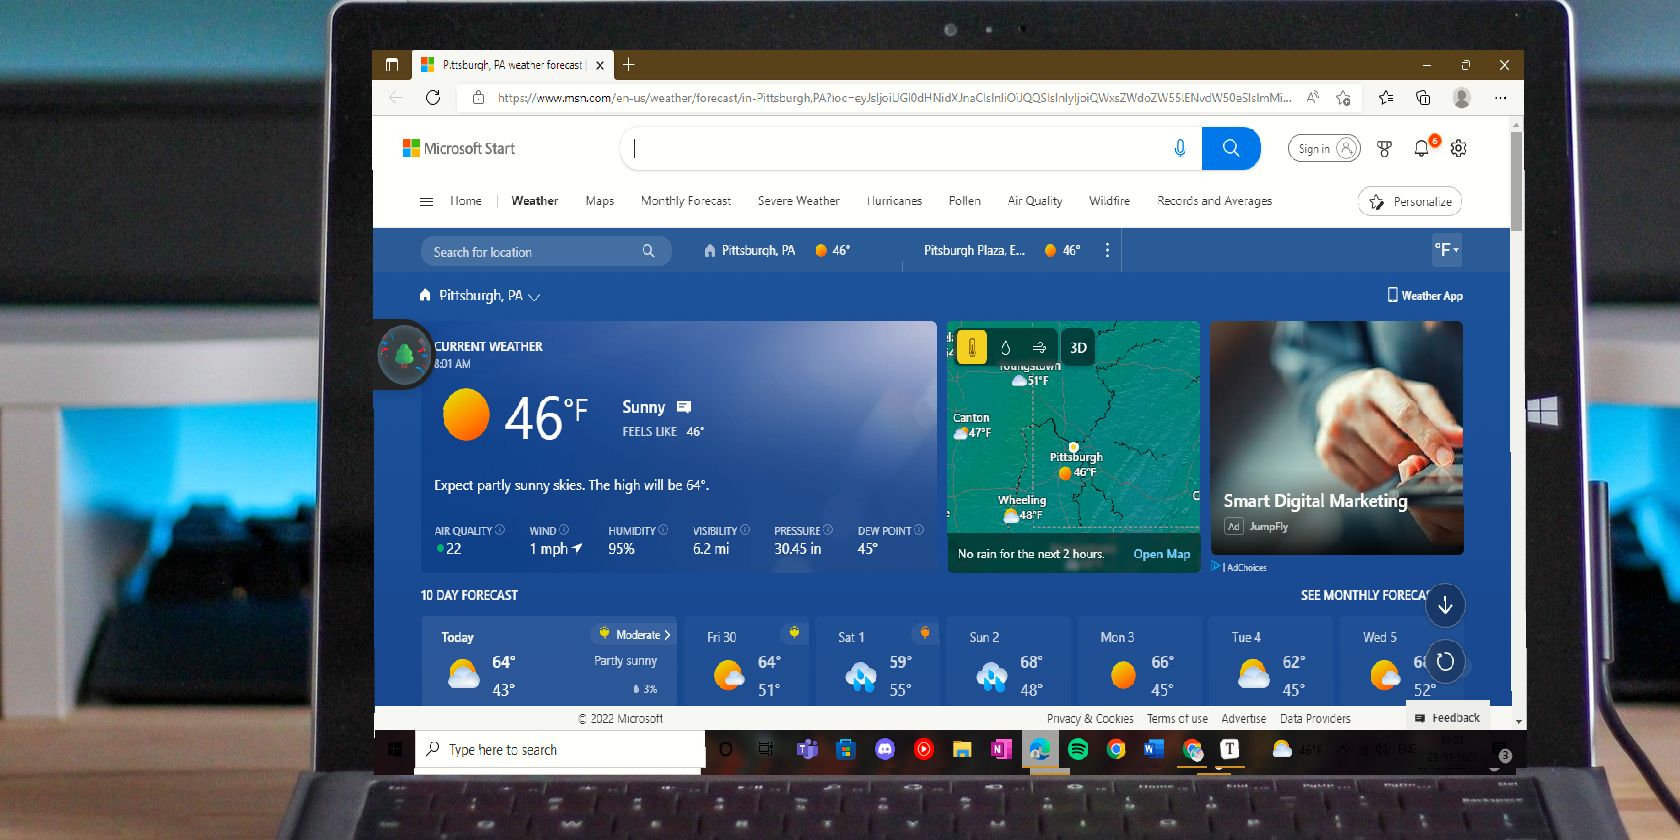 Laptop Screen With Full Weather Forecast of Pittsburgh